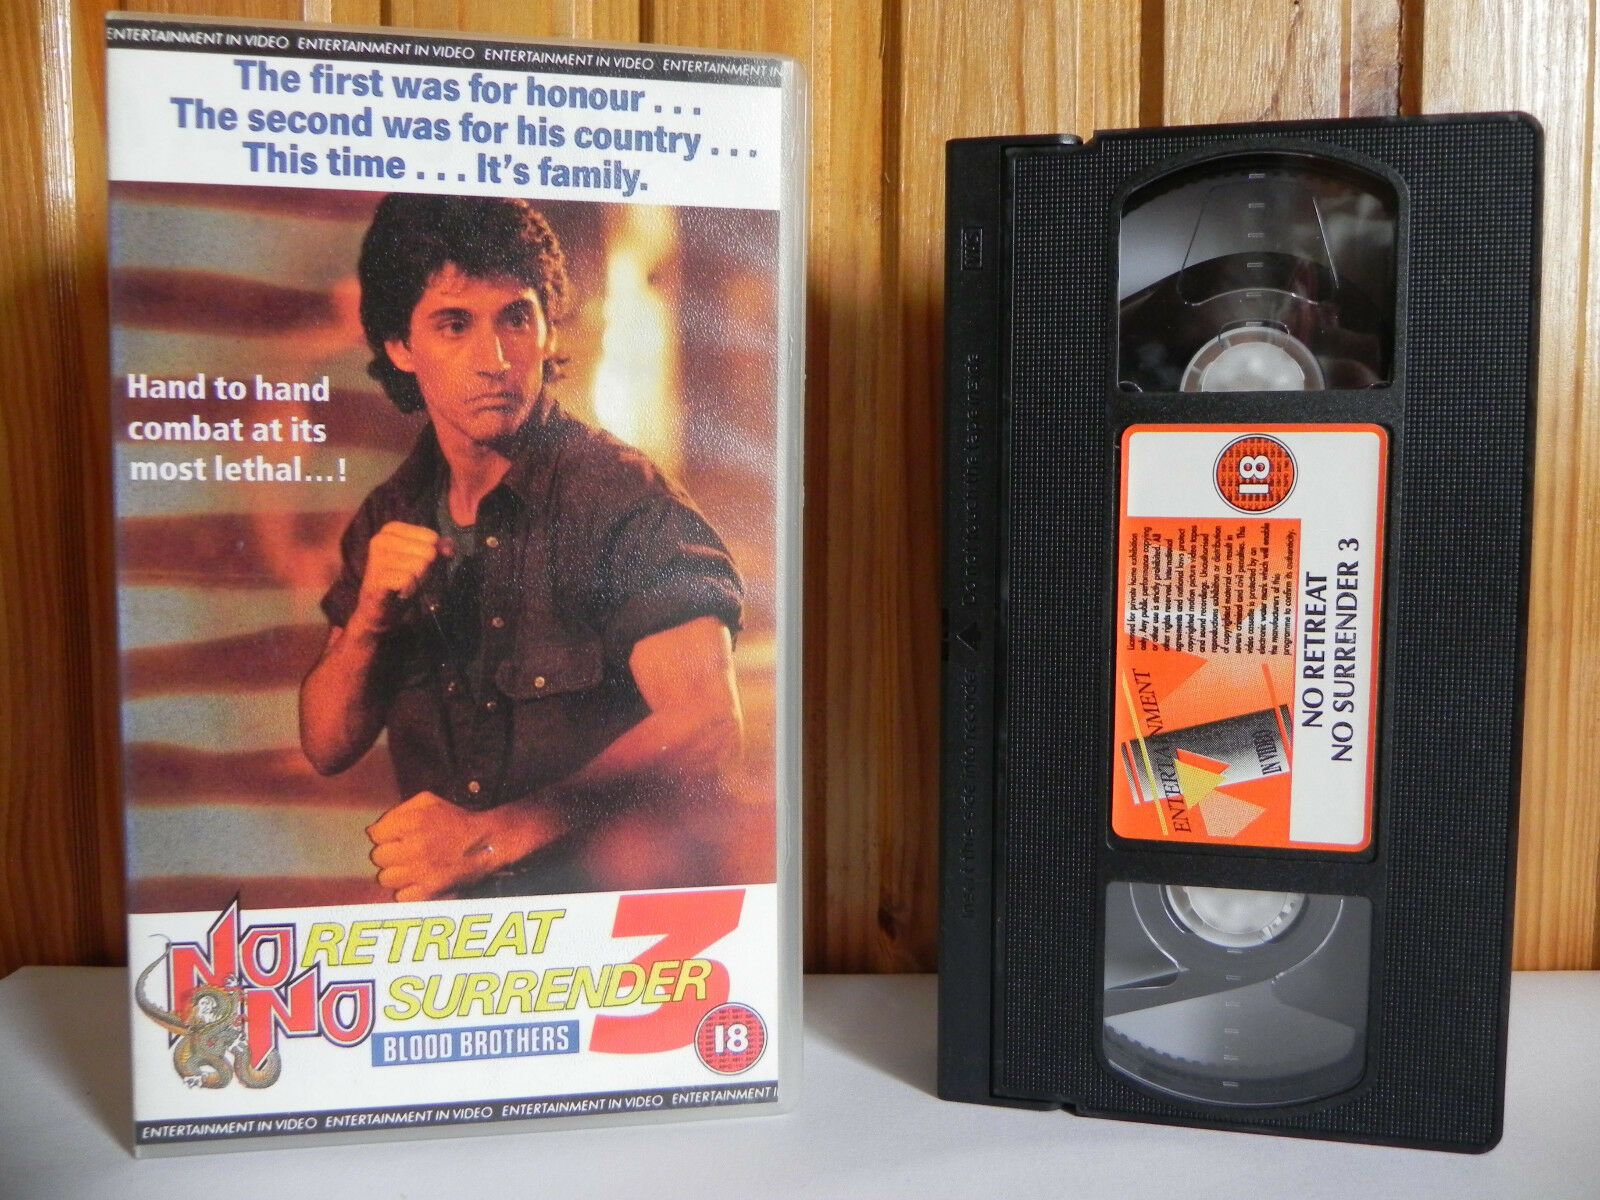 No Retreat, No Surrender 3: Blood Brothers - Entertainment In Video - Pal VHS-